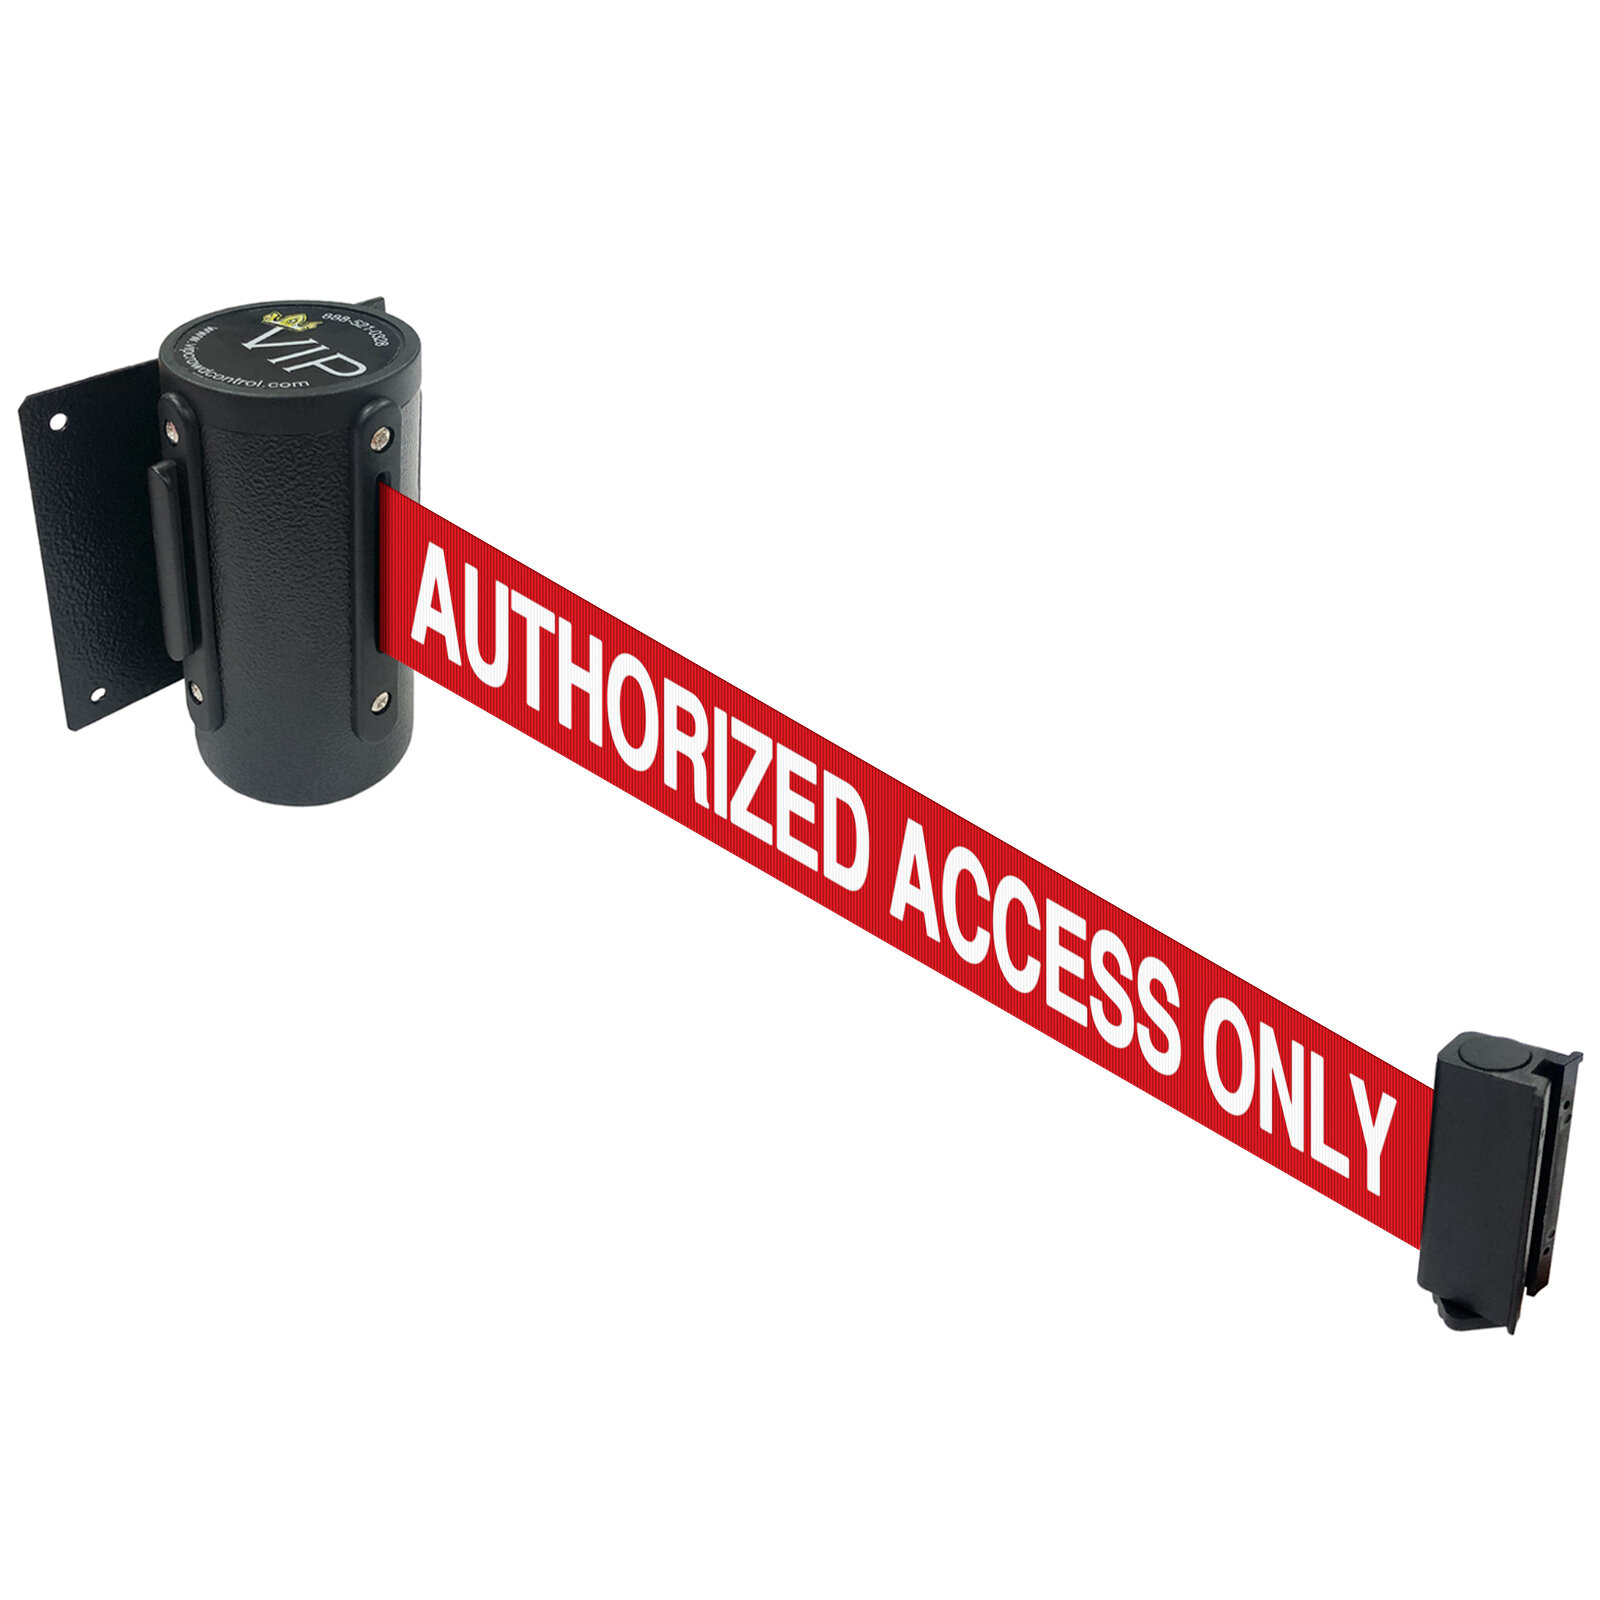 Authorised Access Only Red Retractable Security Belt/Barrier Door Warning Sign